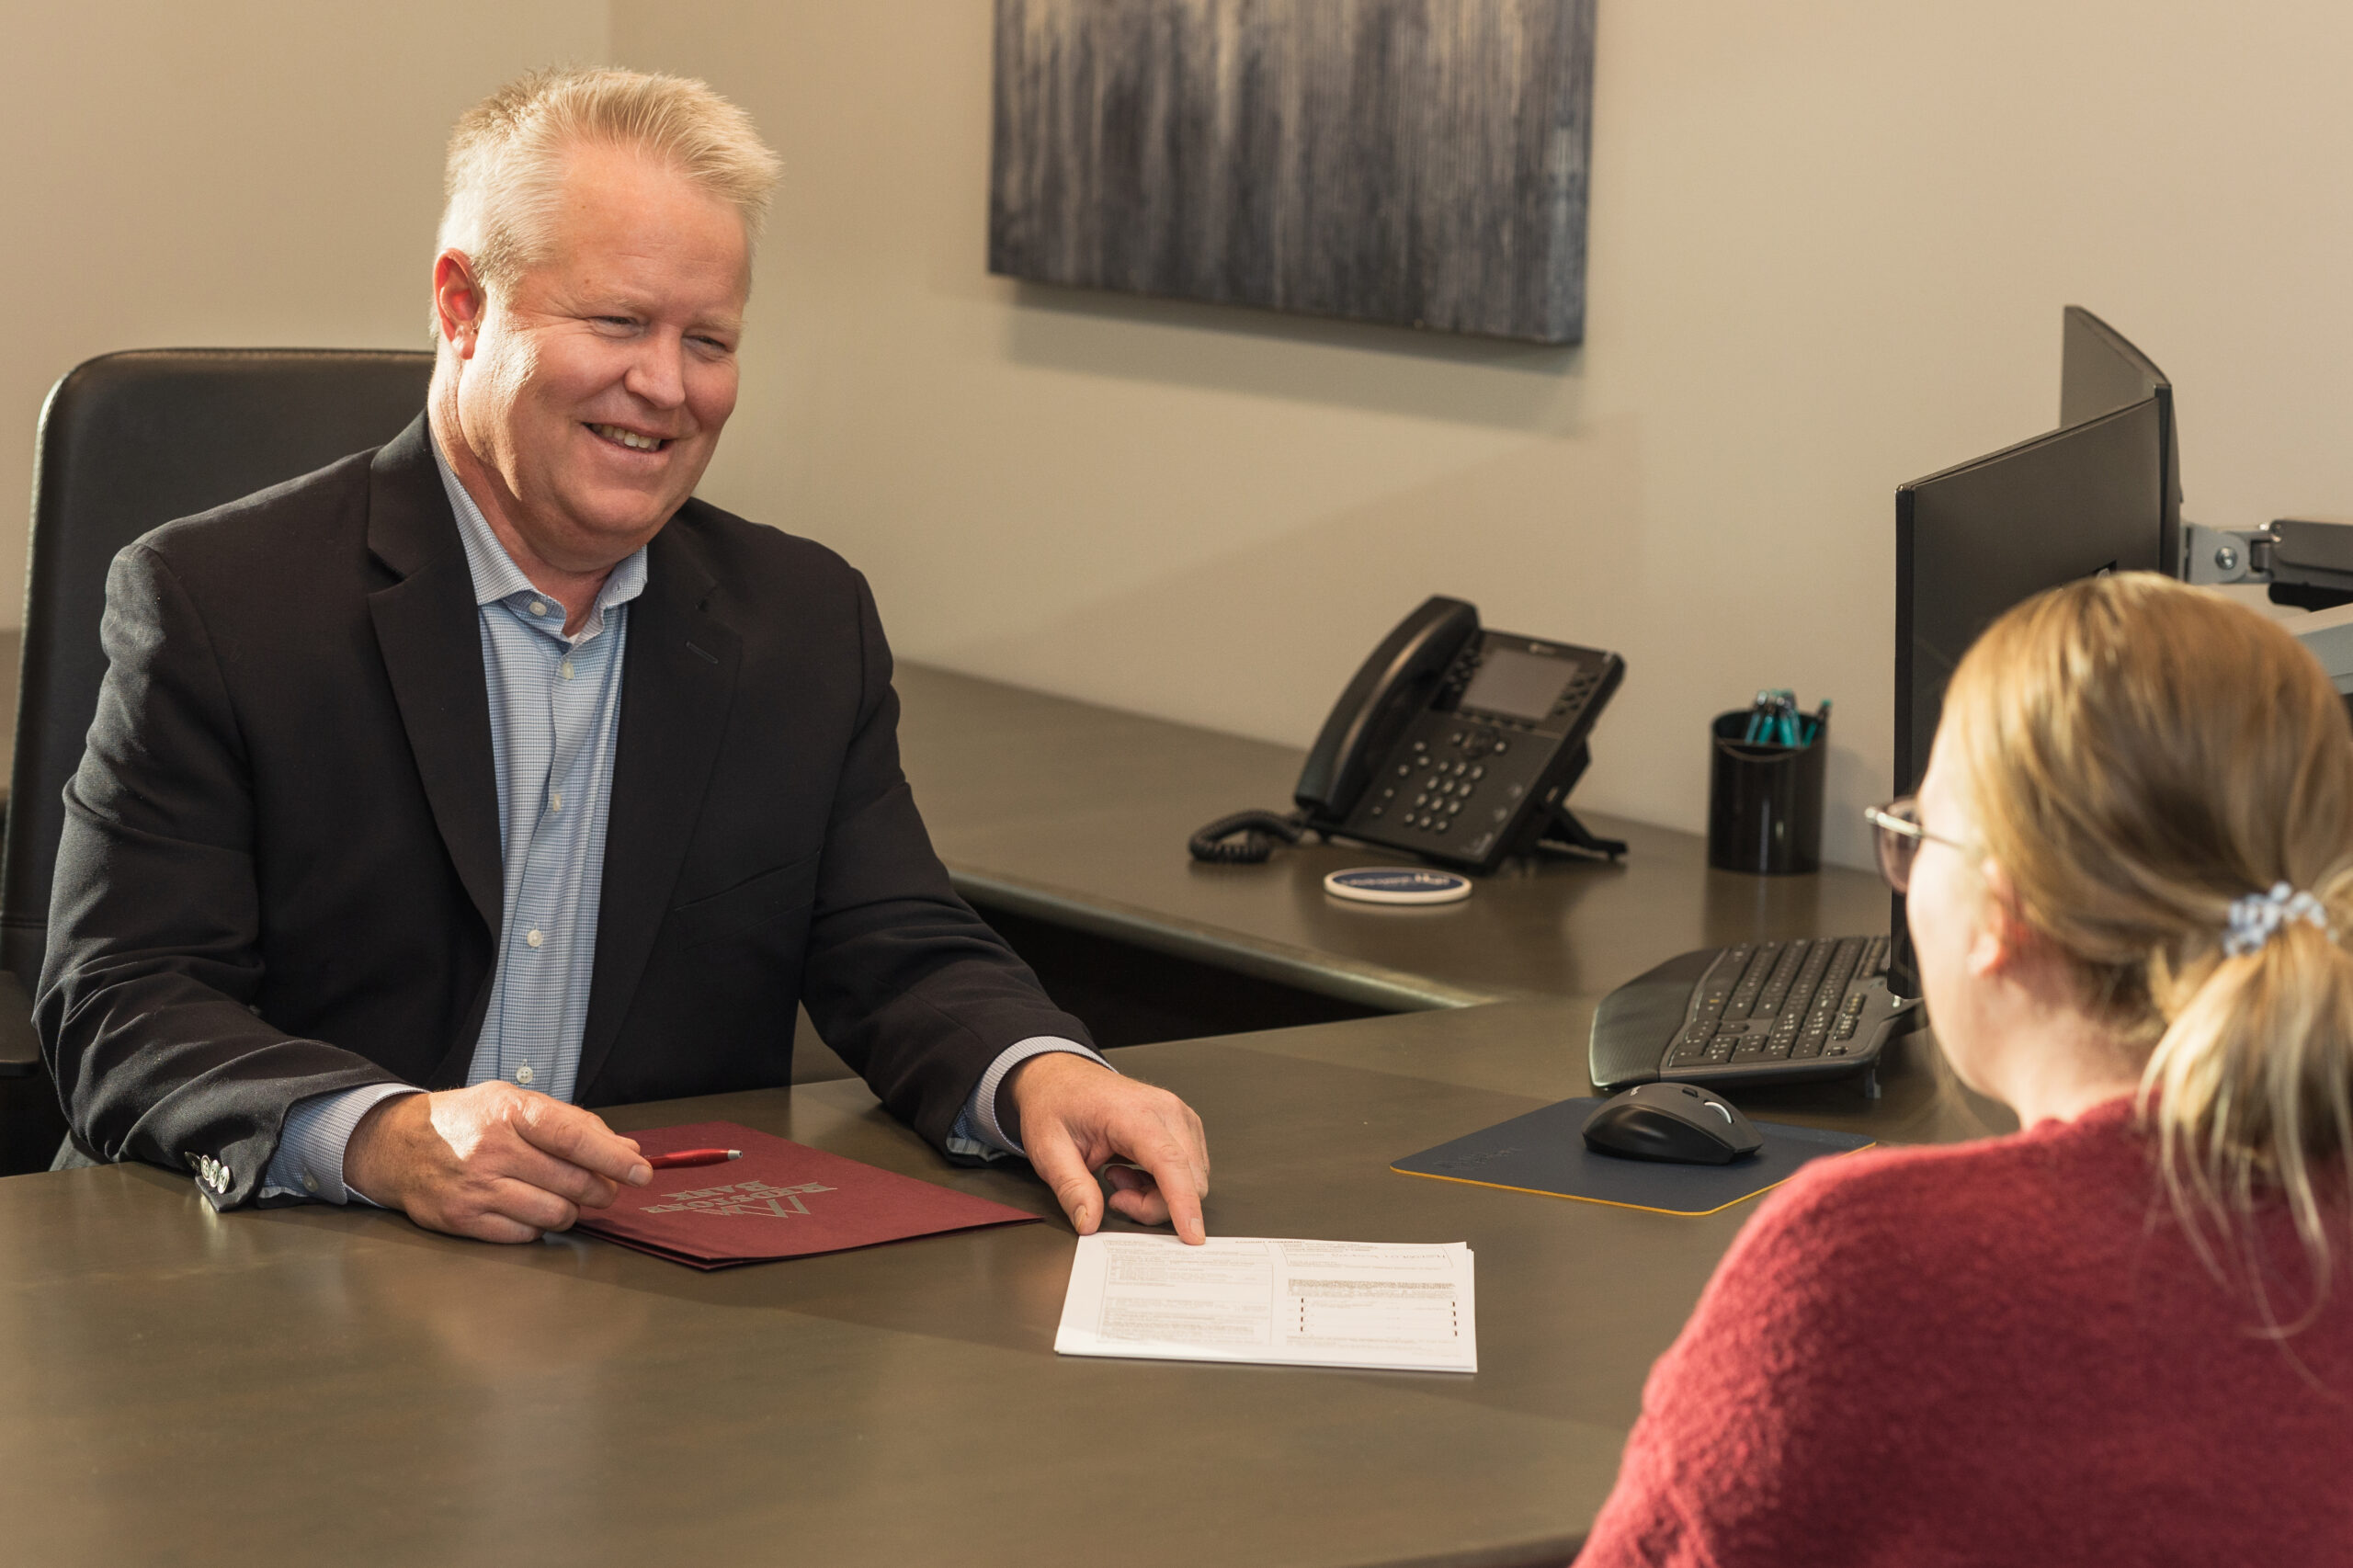 Dave Kochenberger with a client at a desk going over paperwork.